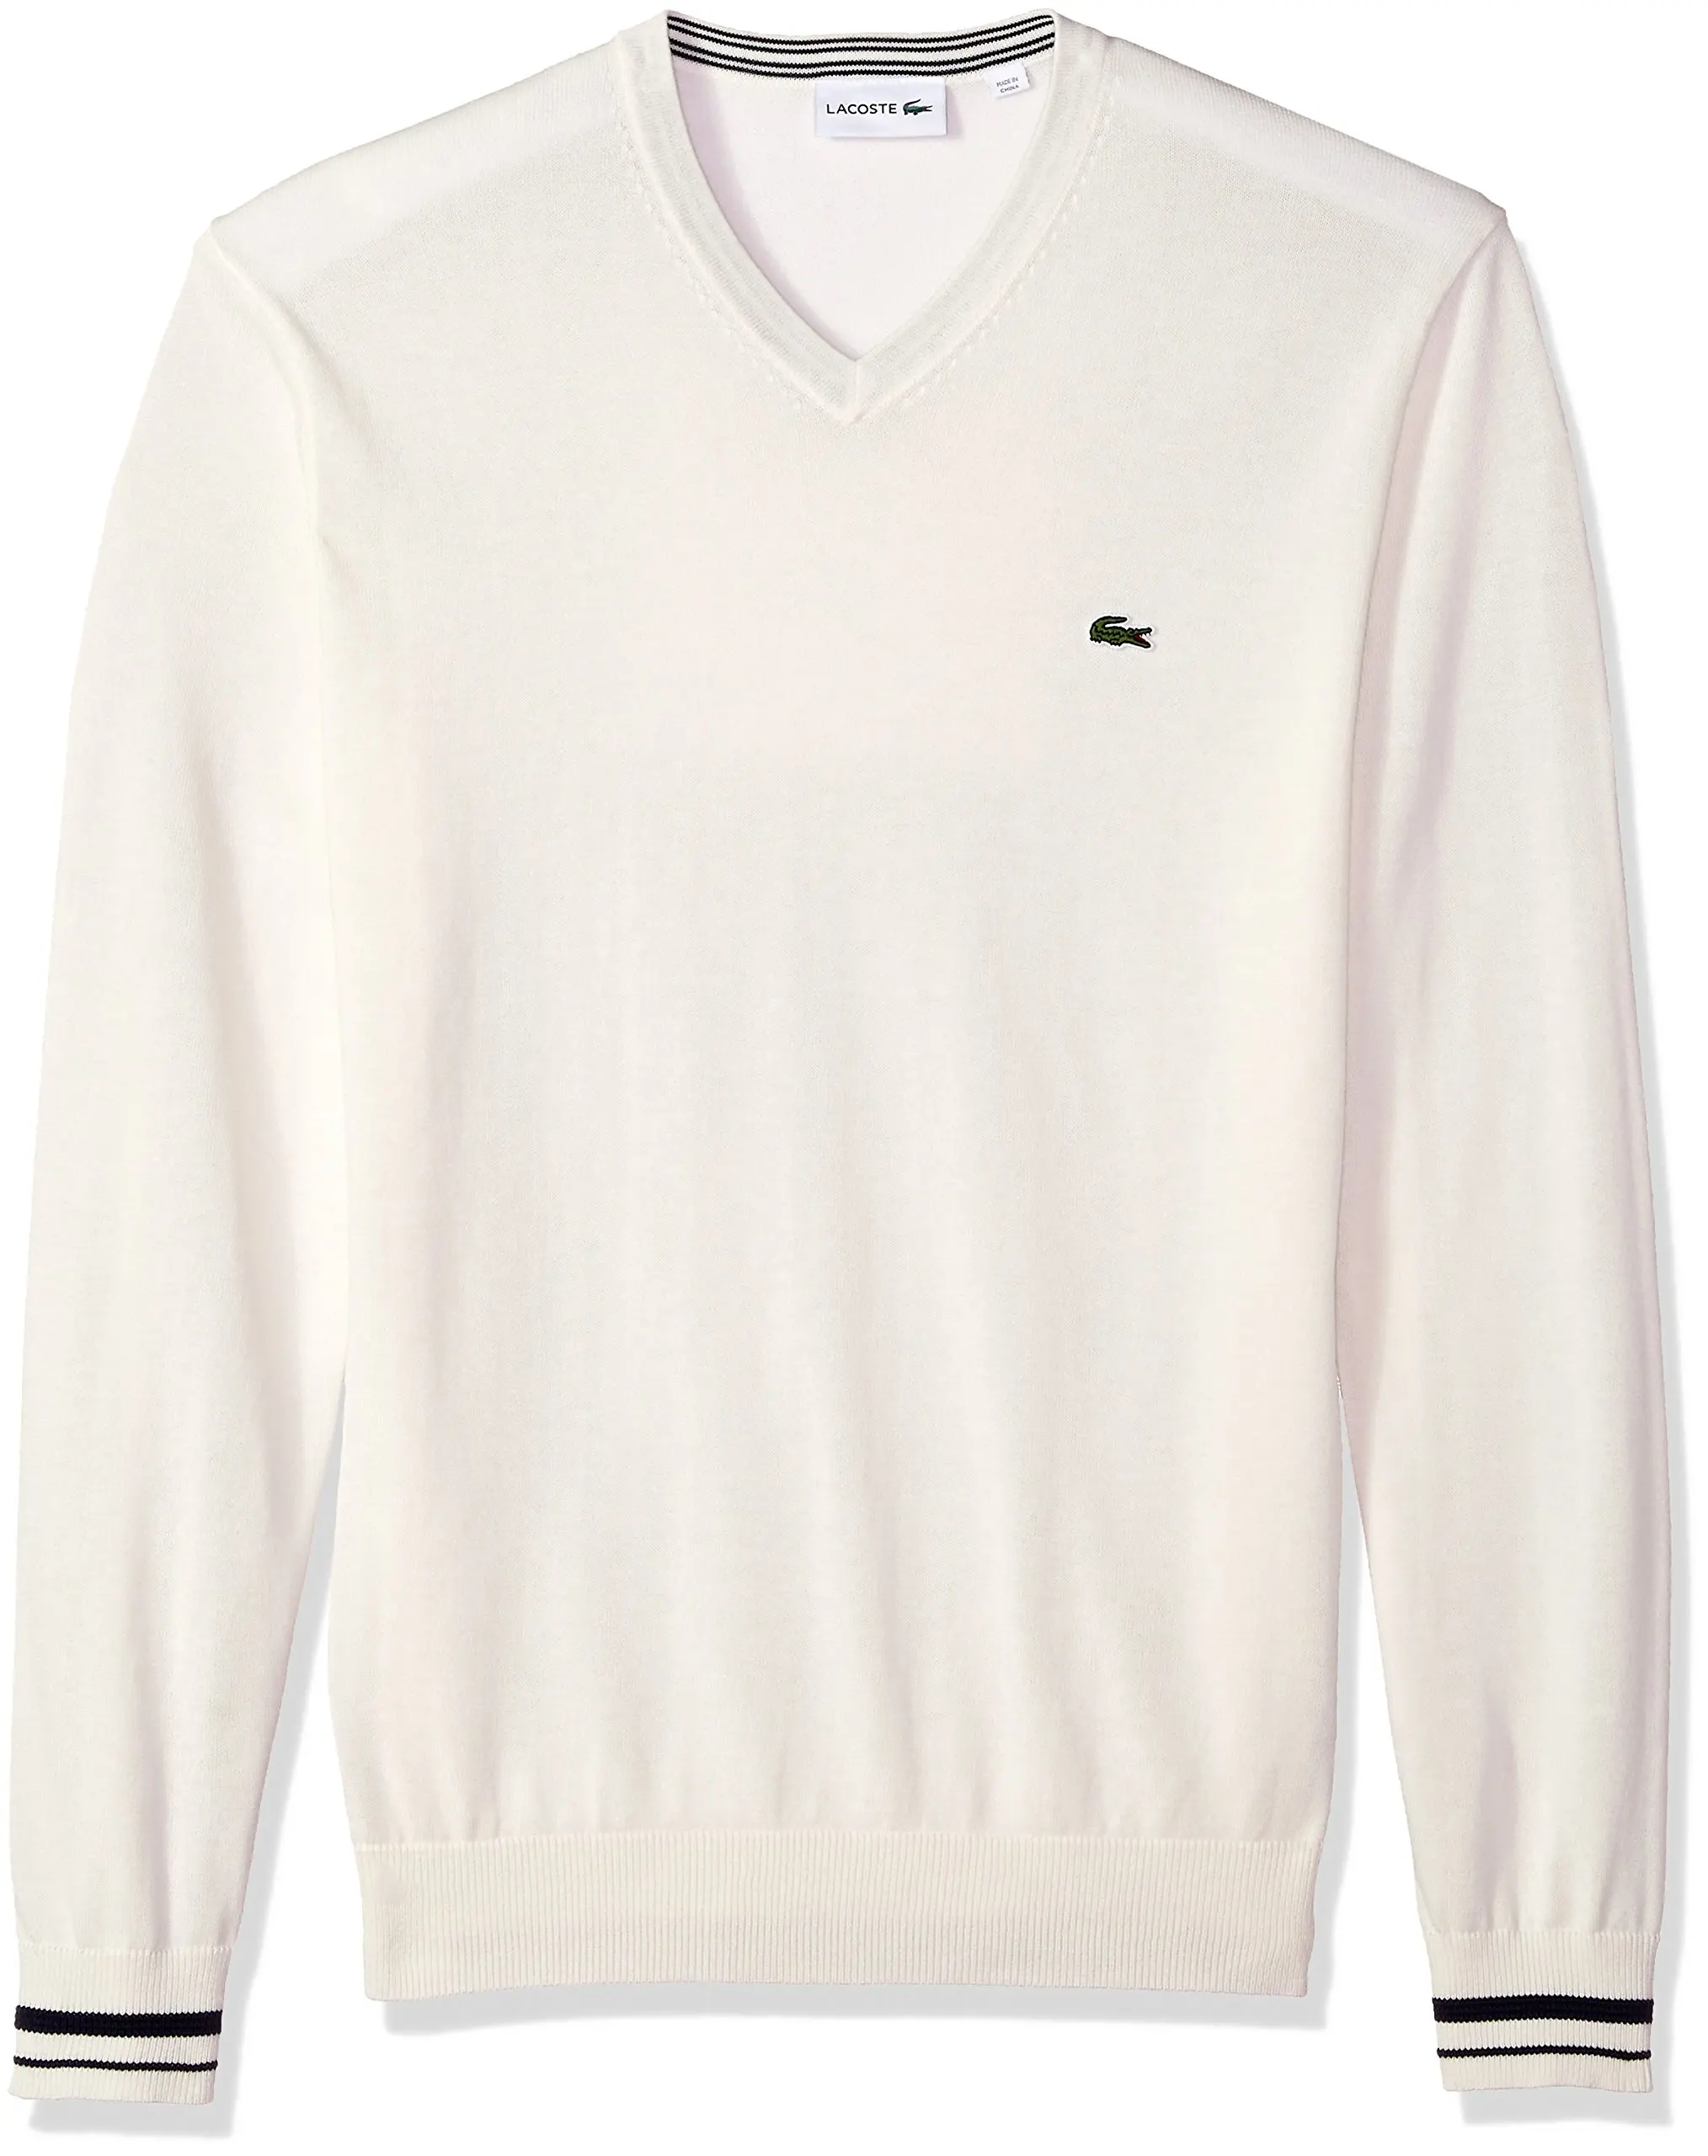 cheap lacoste sweaters